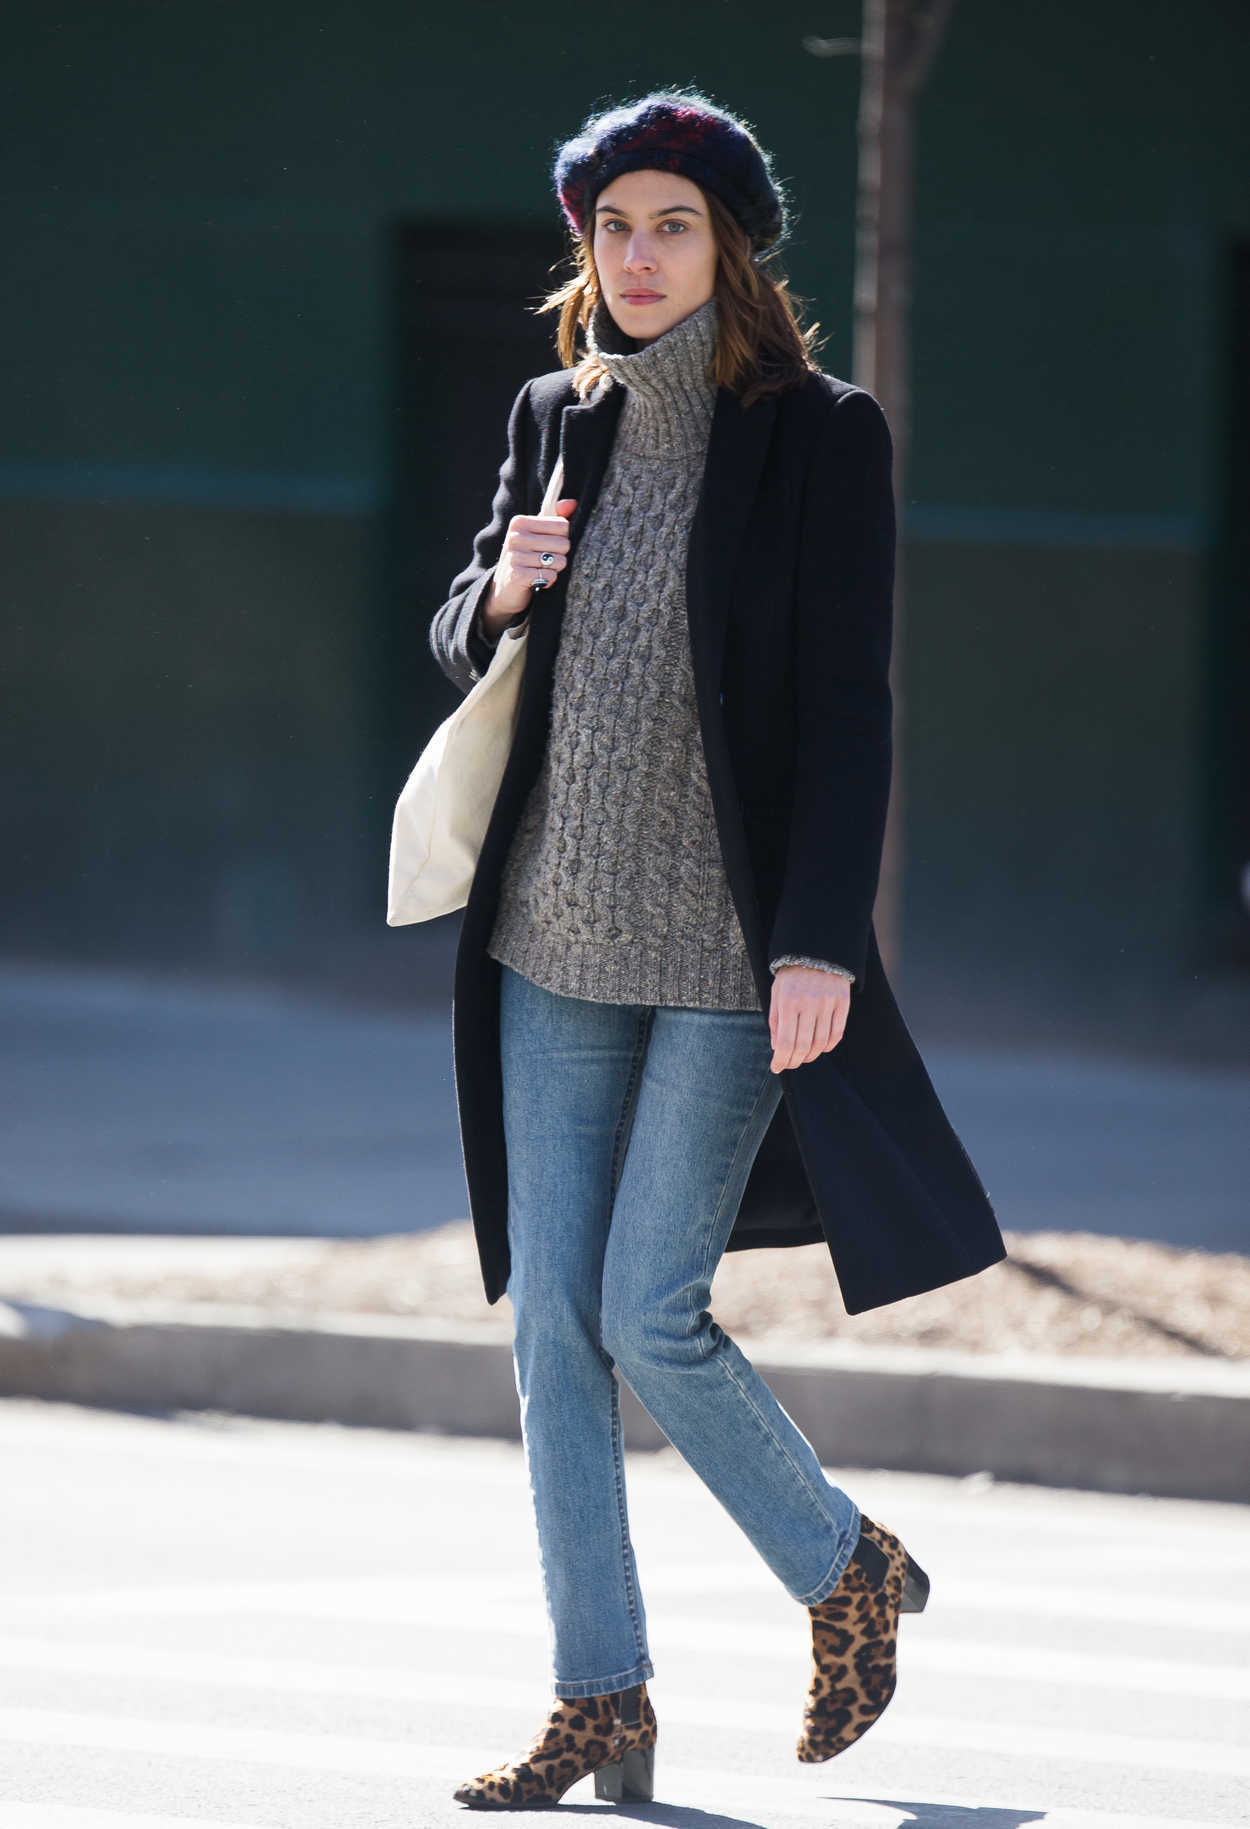 alexa-chung-was-seen-out-in-new-york-03-21-2017-1.jpg